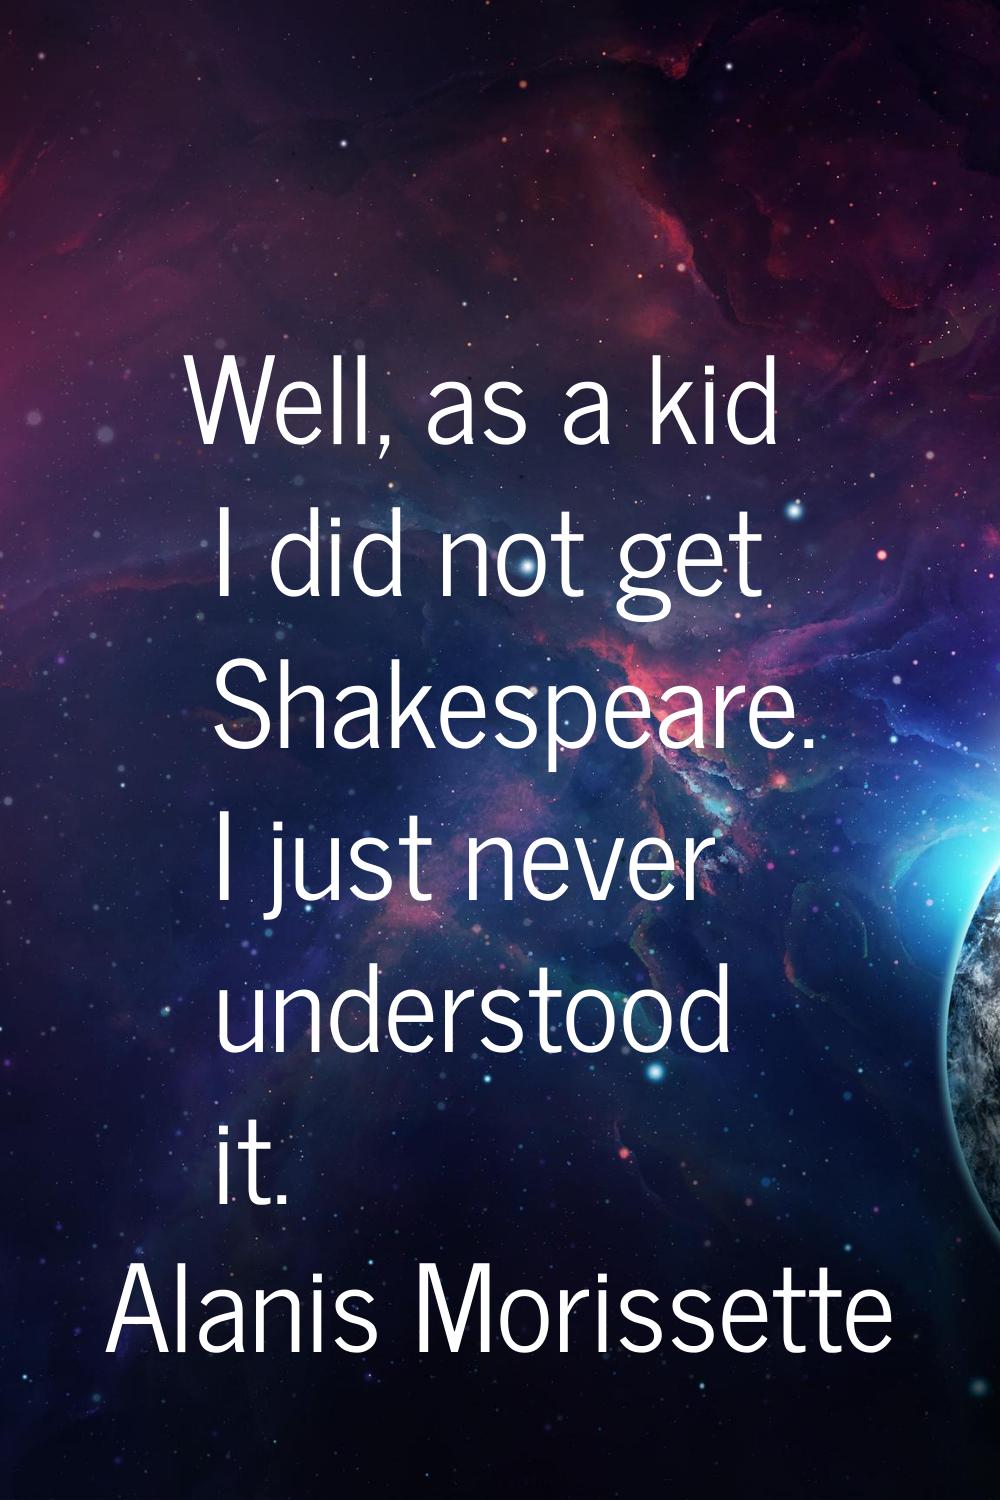 Well, as a kid I did not get Shakespeare. I just never understood it.